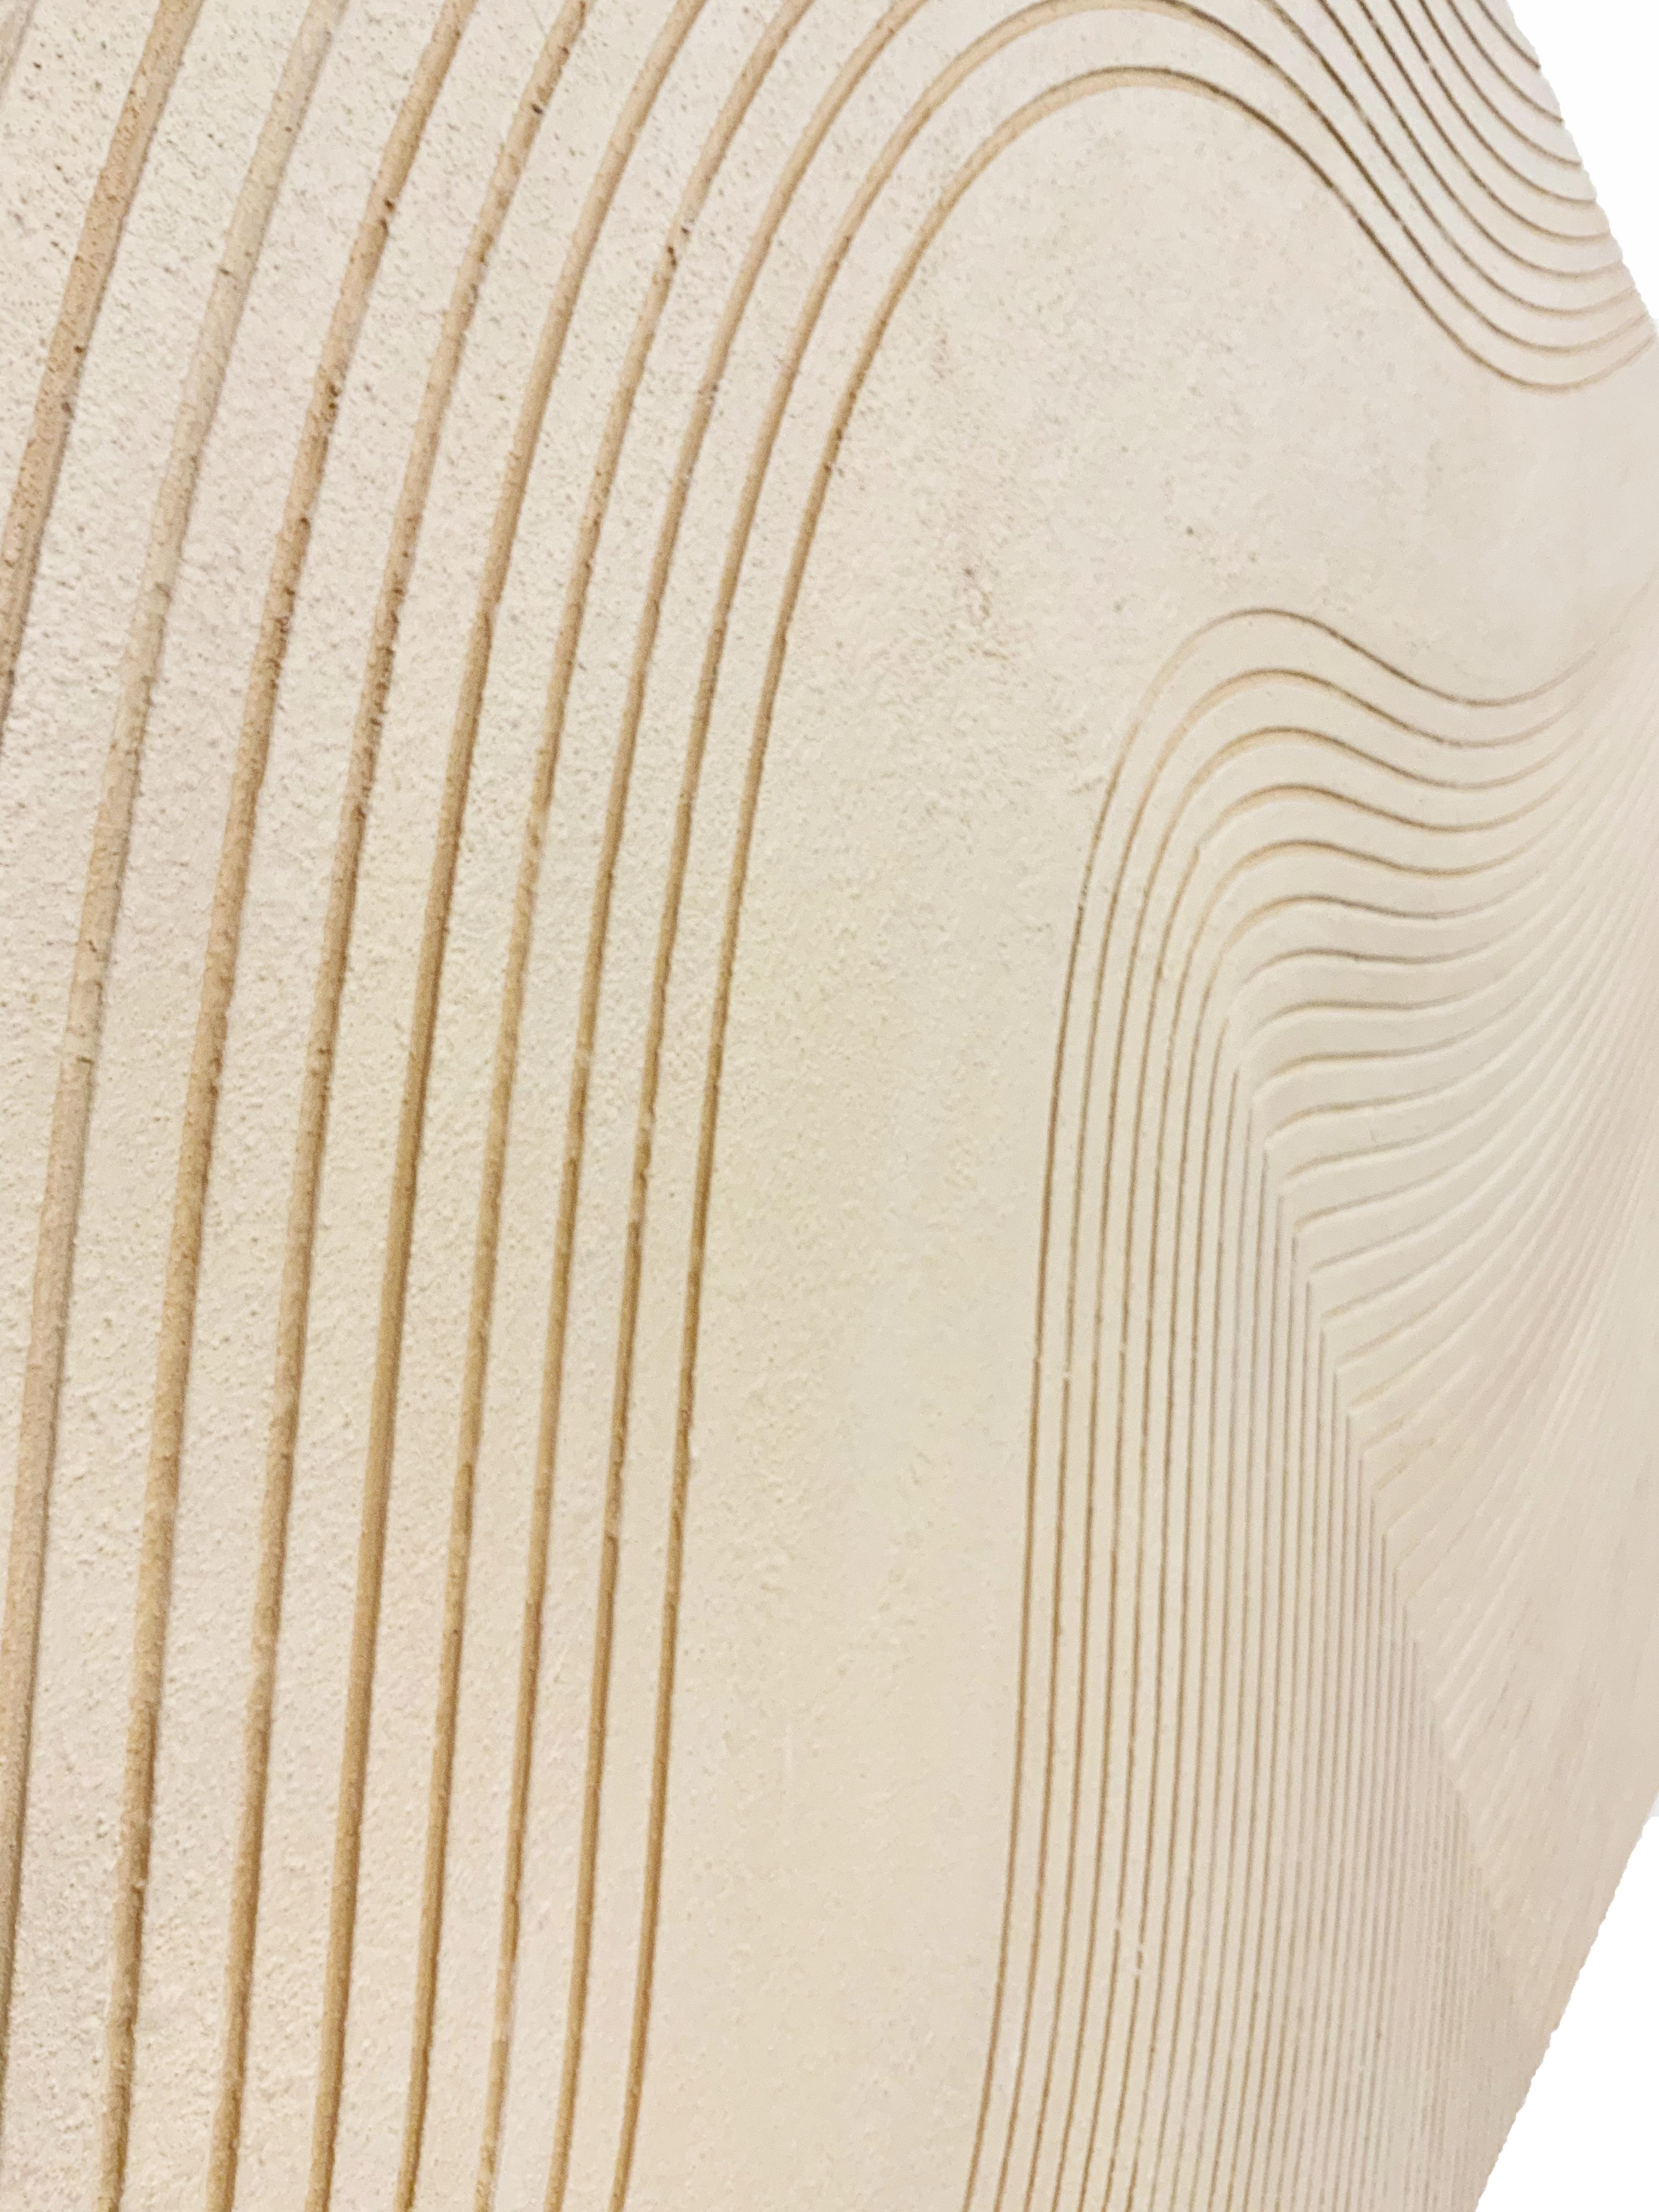 TIDES AND SANDY PATTERNS. Neutral and ideal for modern homes.  - Contemporary Sculpture by Arozarena De La Fuente